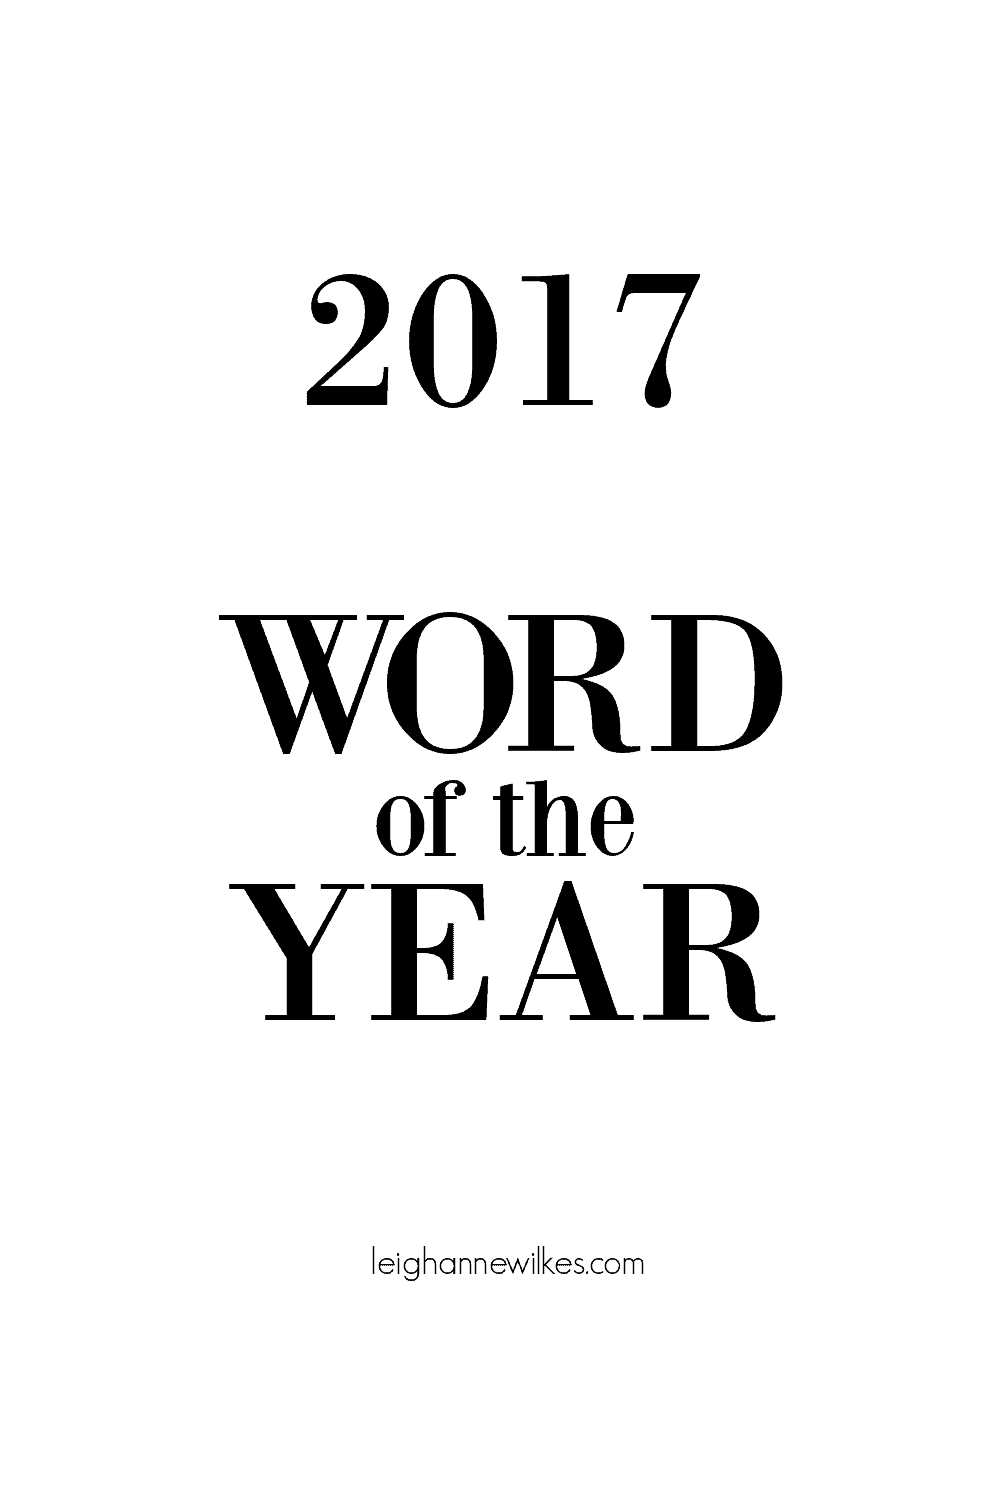 2017 word of the year